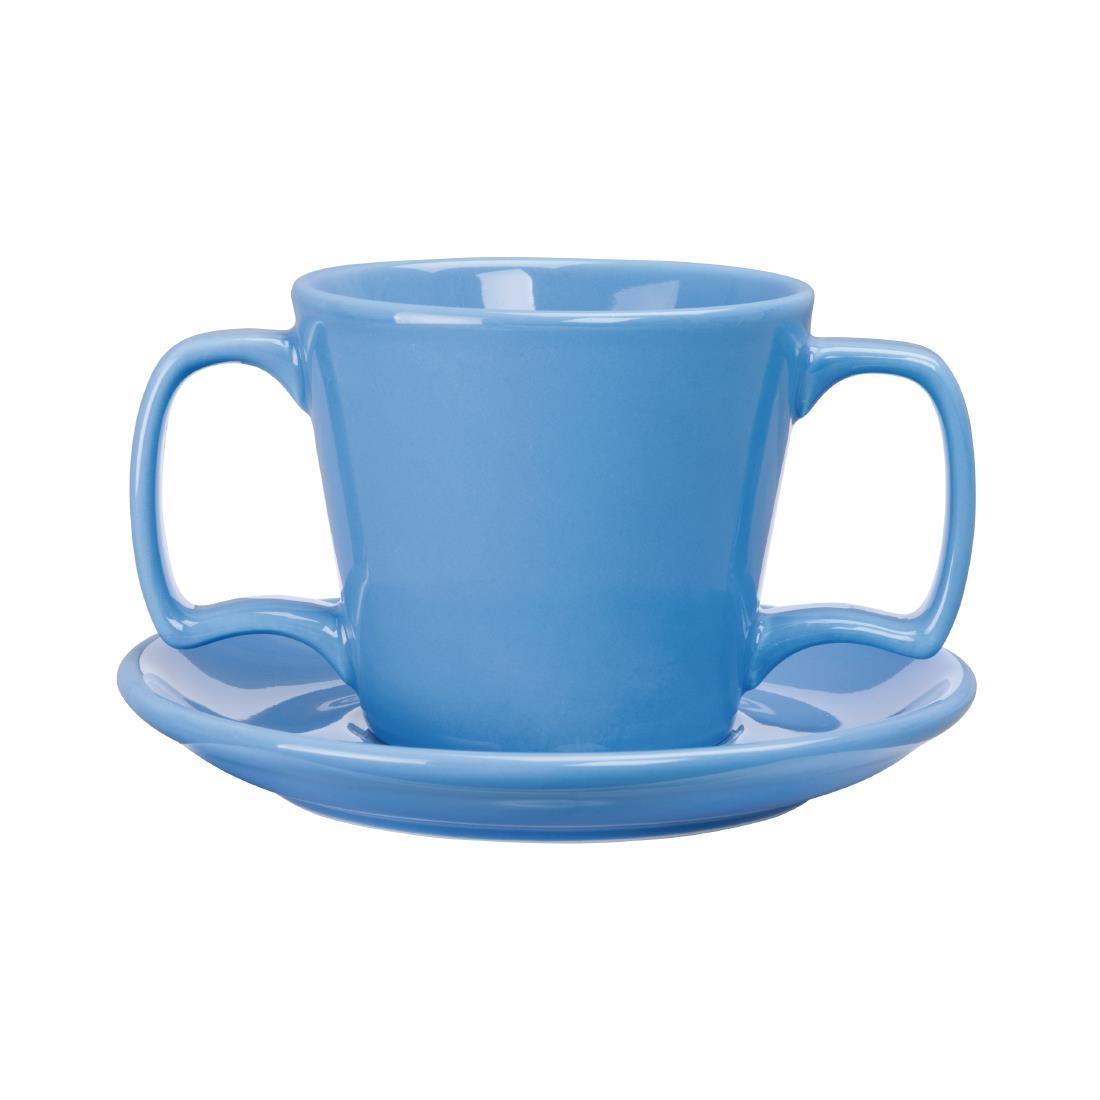 Olympia Heritage Double Handle Mug Blue 300ml (Pack of 6) - DW143  - 2